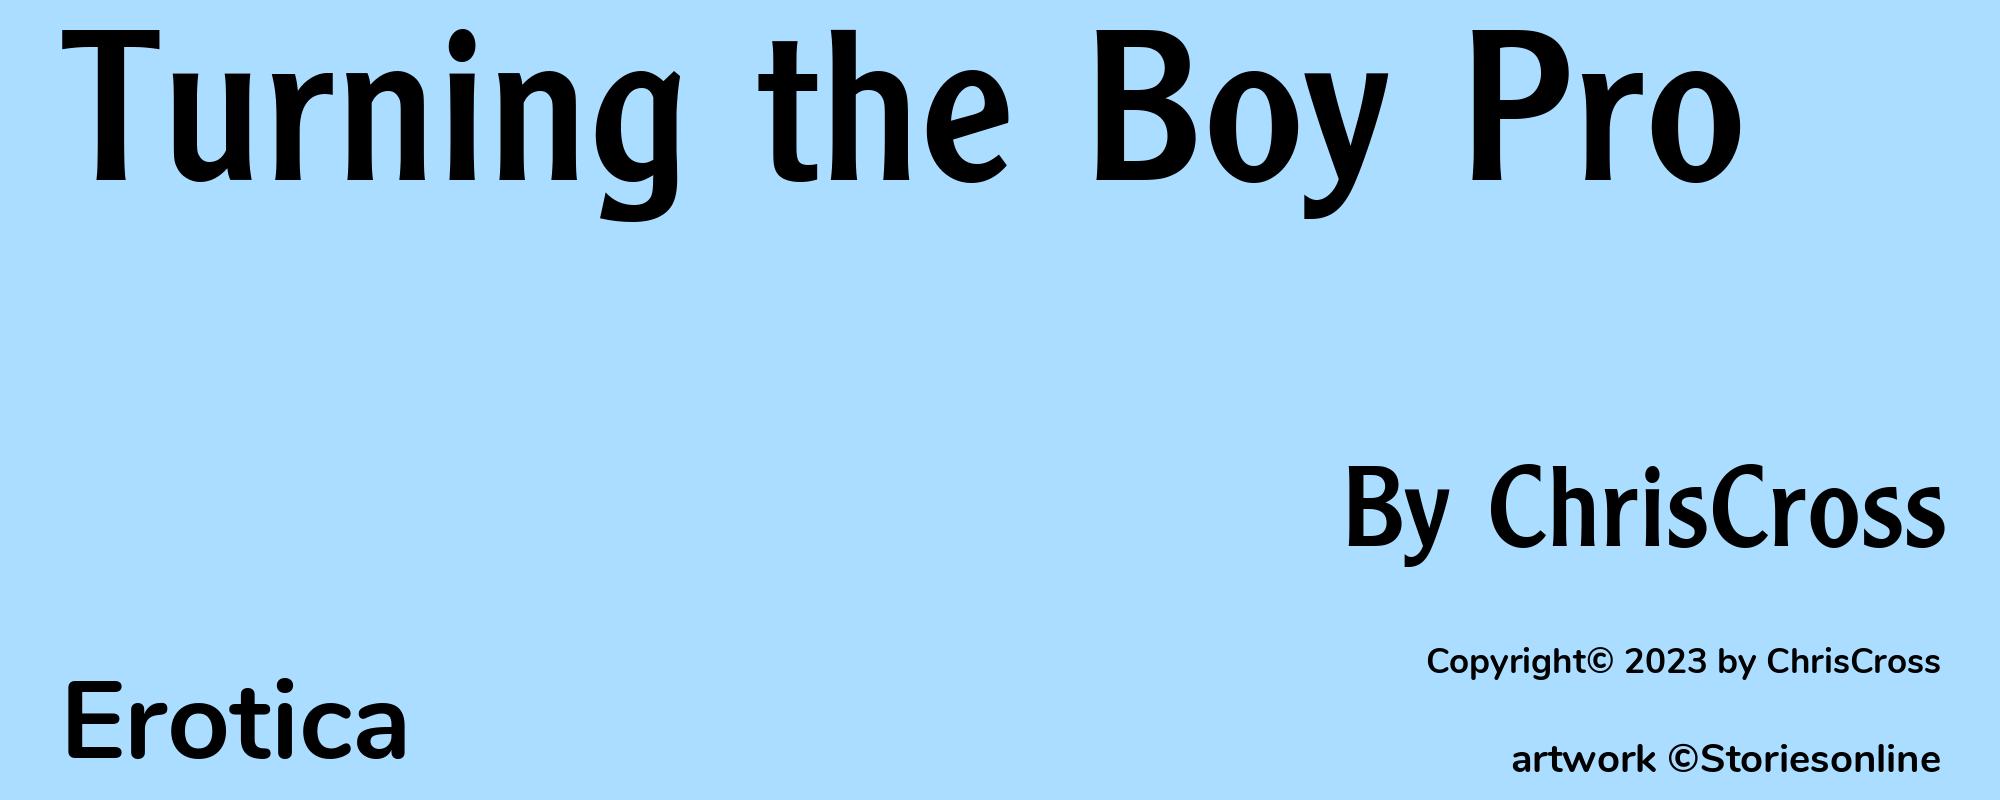 Turning the Boy Pro - Cover